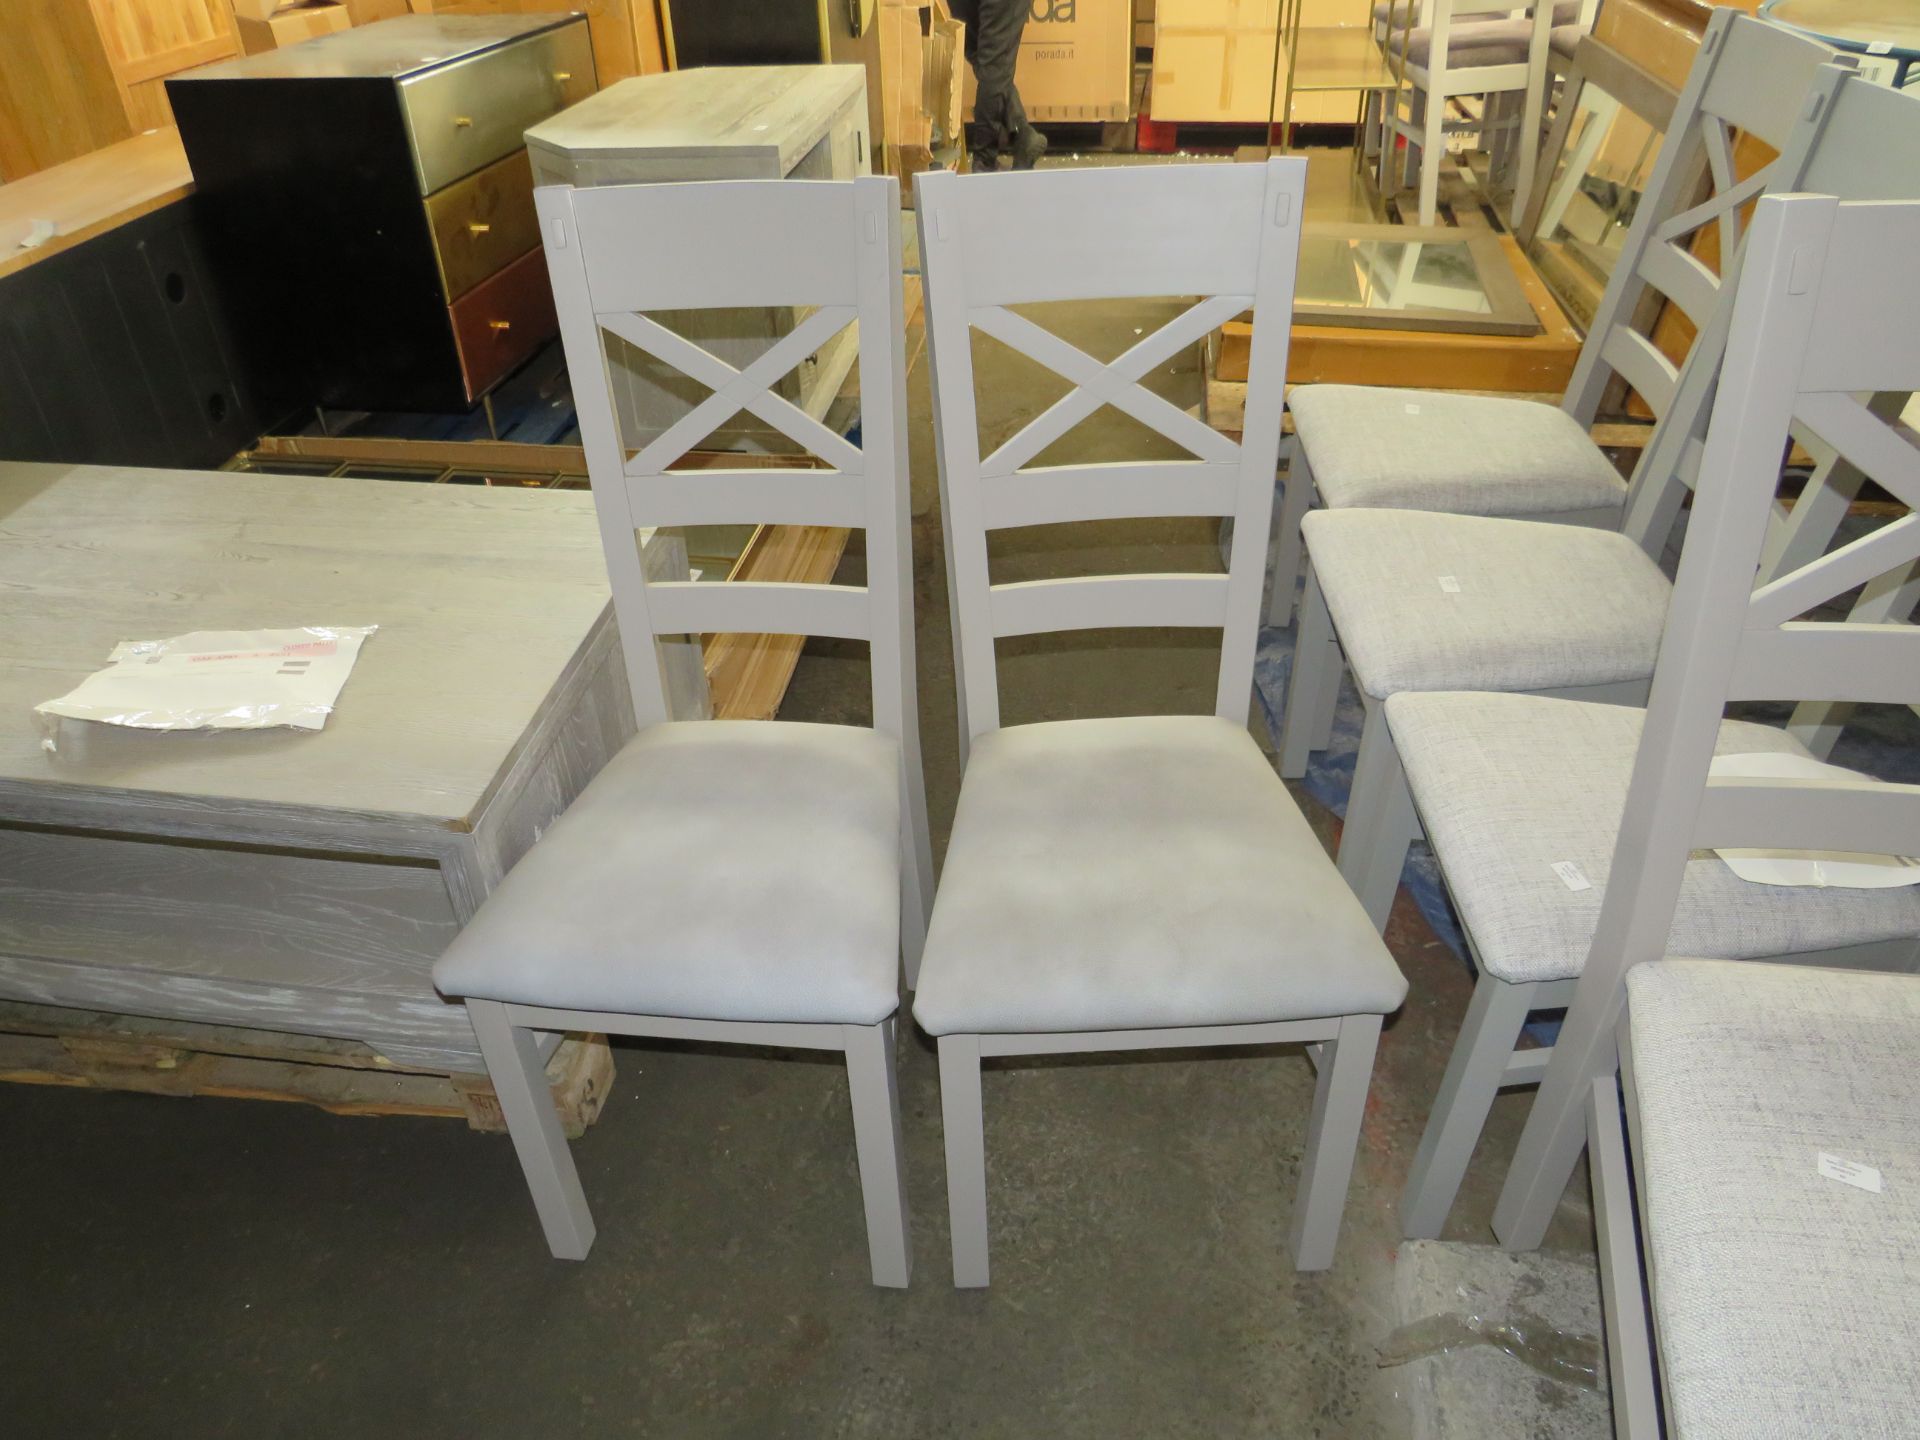 Oak Furnitureland St Ives Light Grey Painted Chair with Dappled Silver Fabric Seat (Pair) RRP 380.